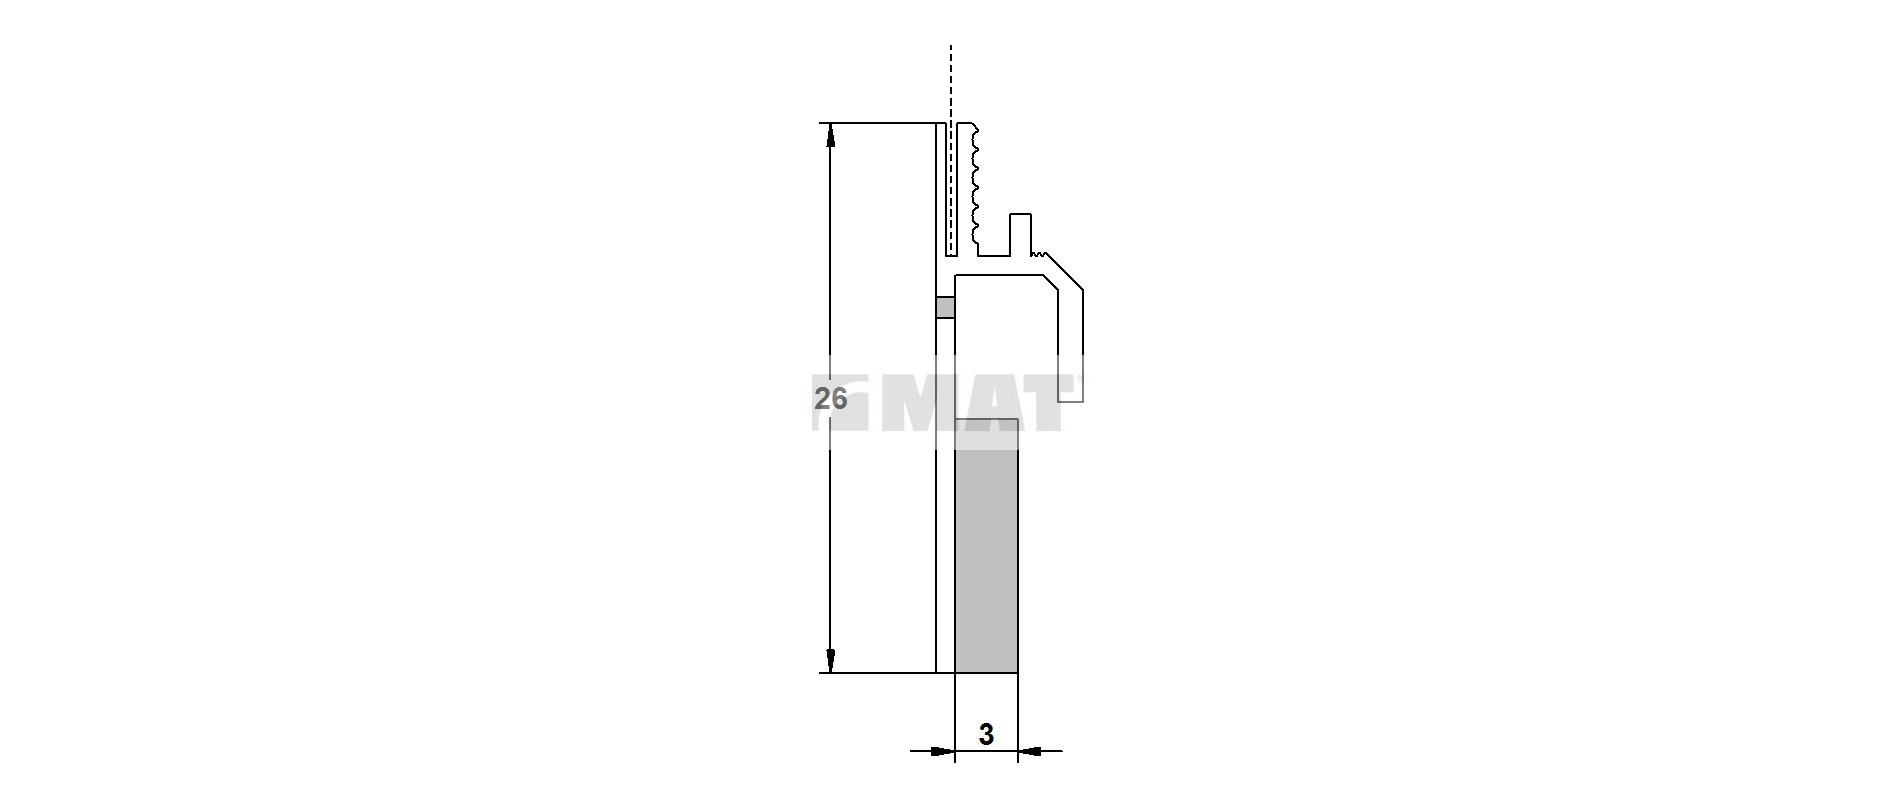 Profile for side sill connection, code D/21